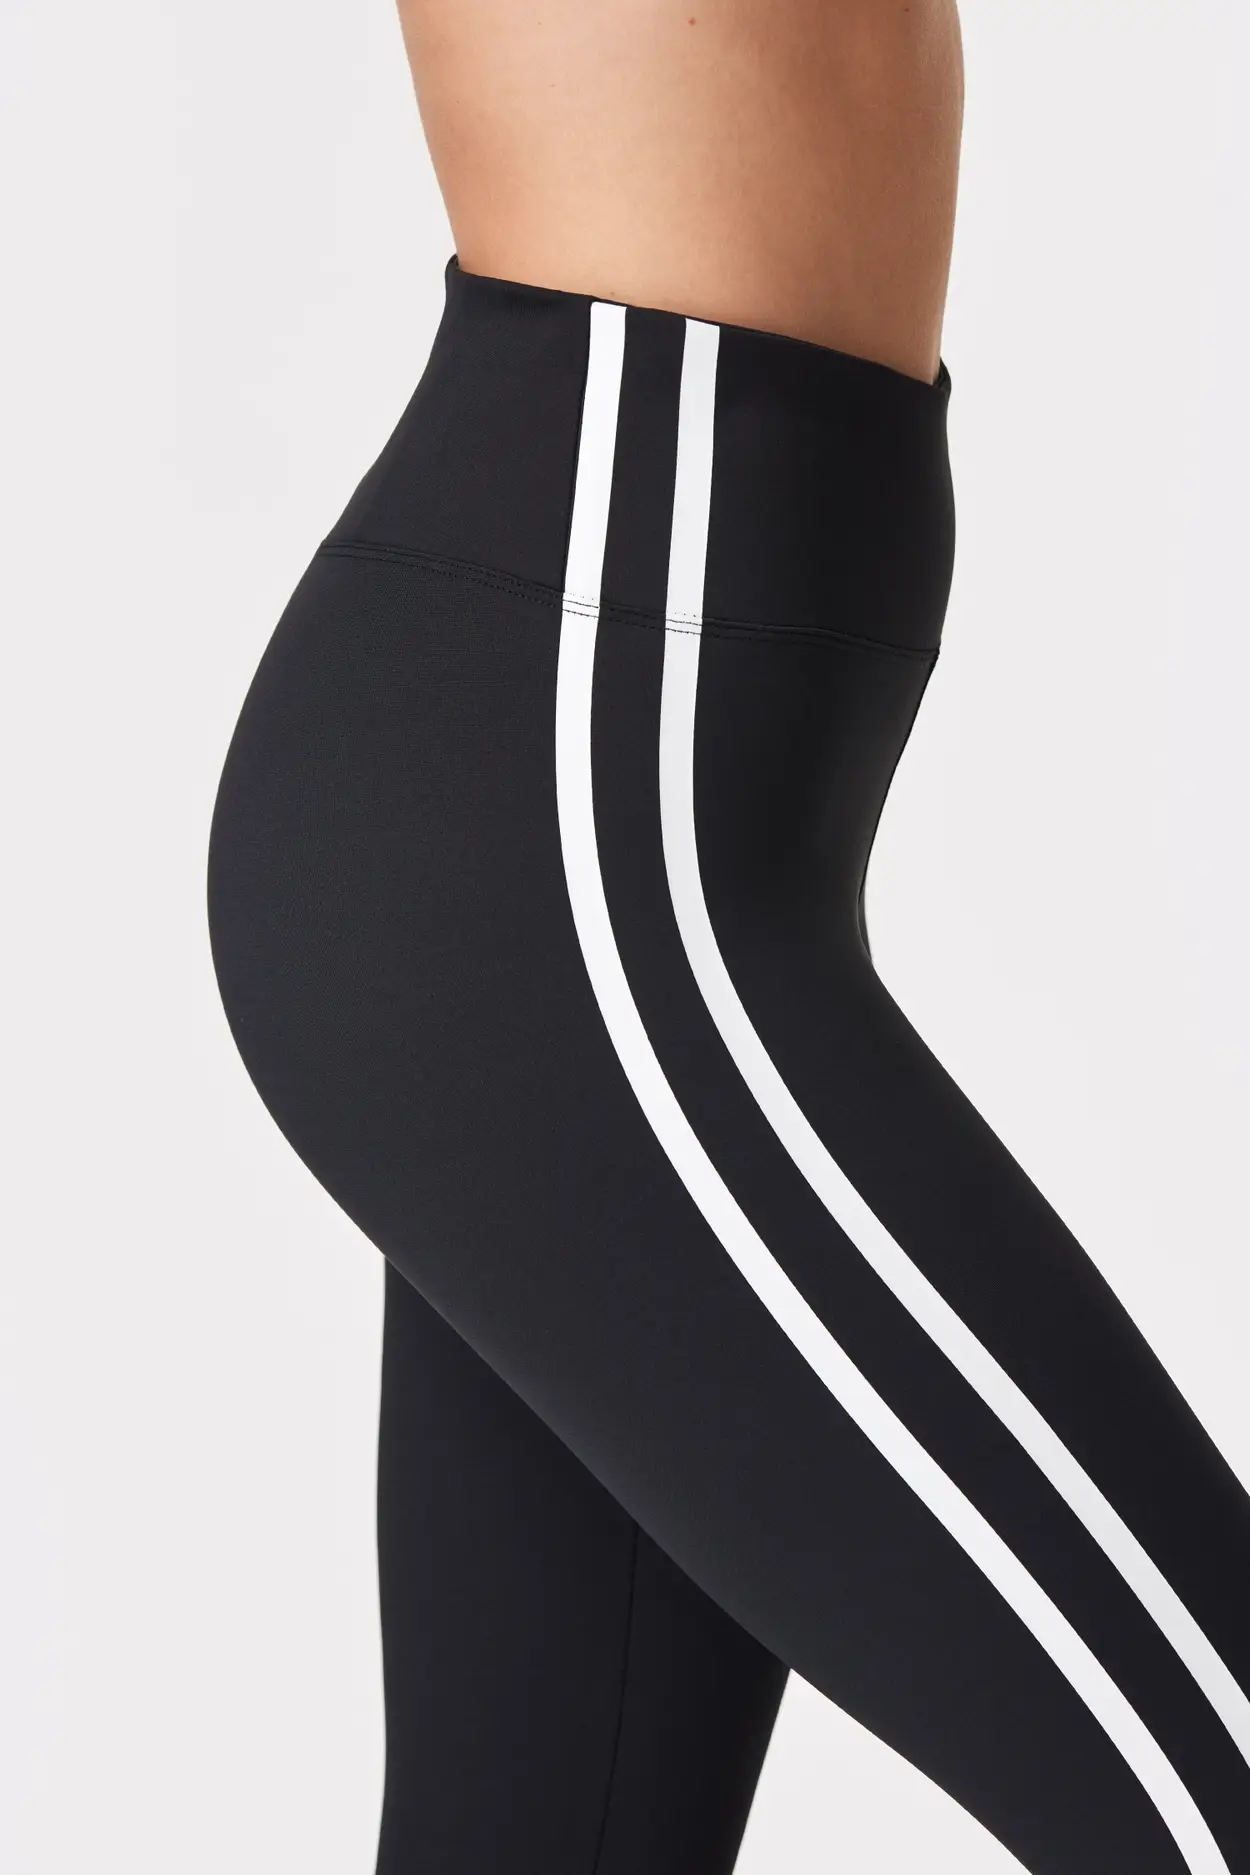 Black Carbon Fiber Leggings from All Good Laces